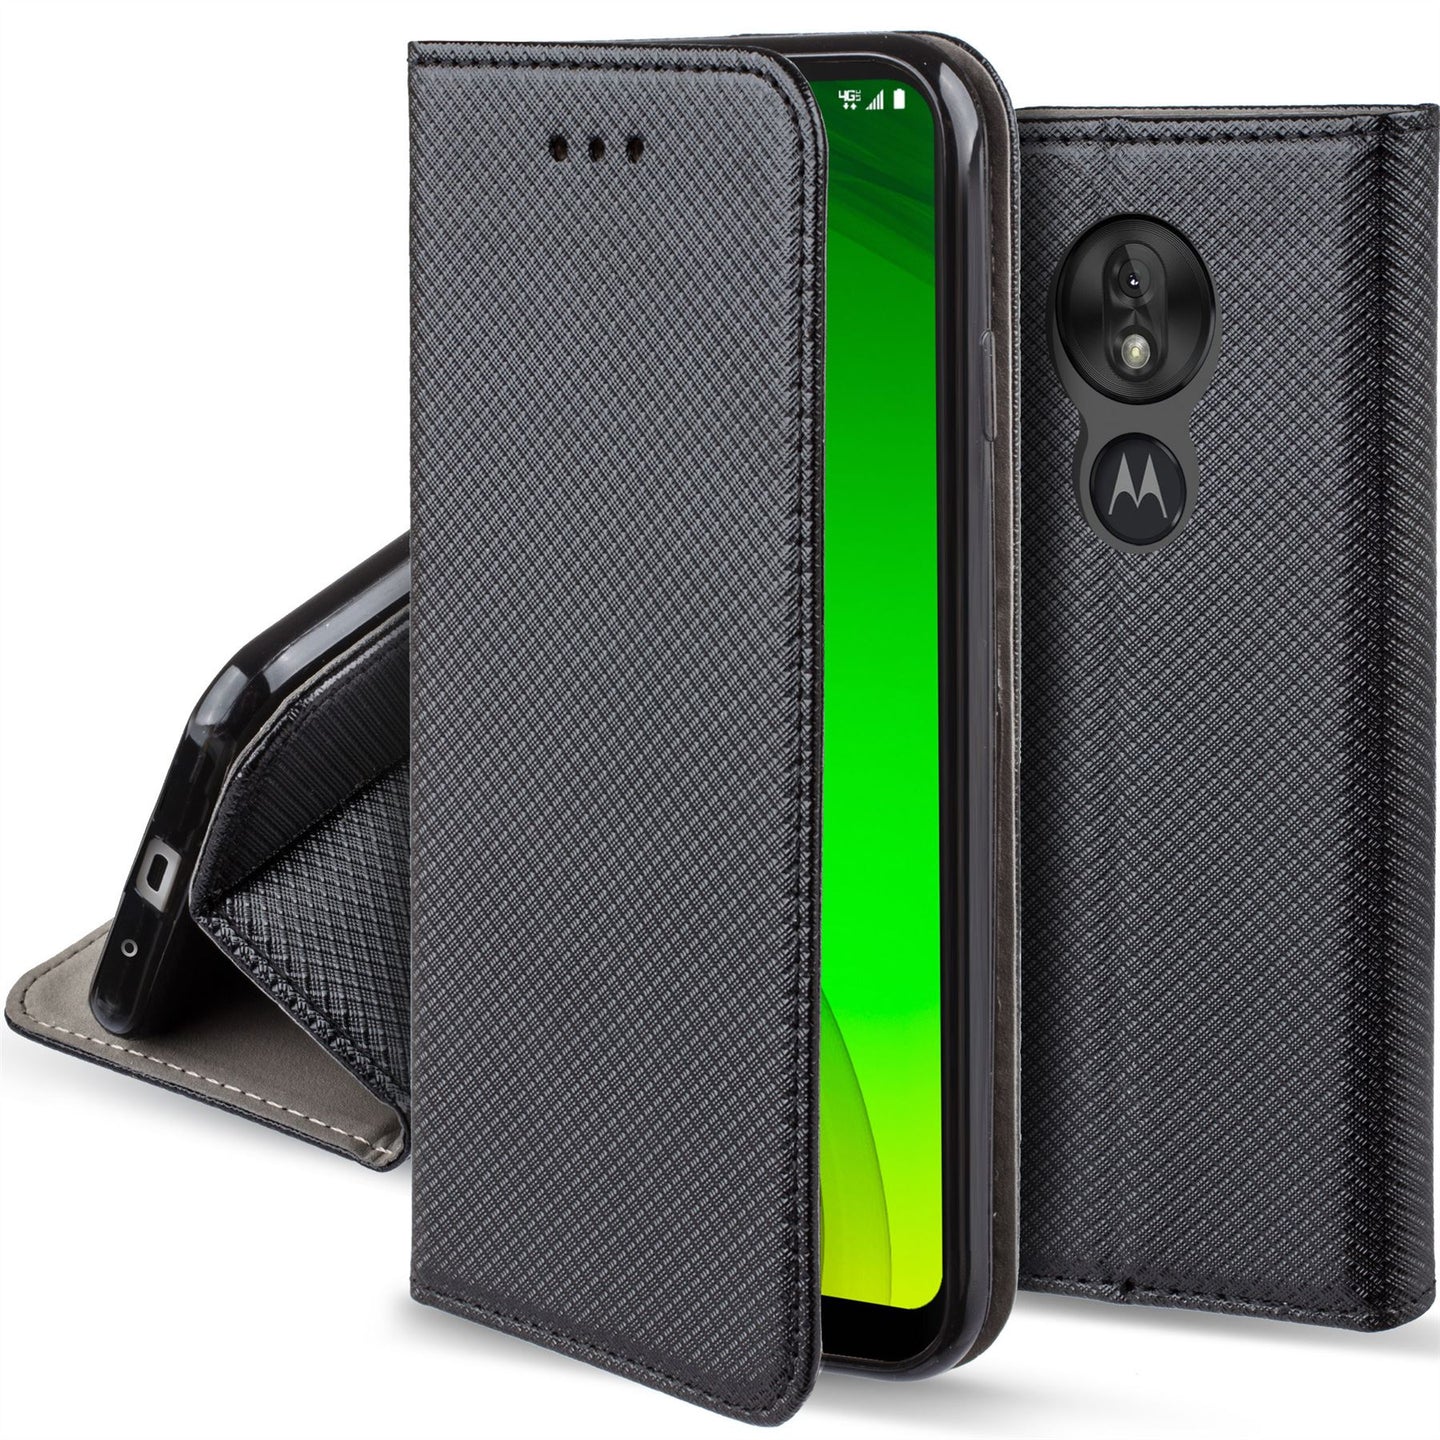 Moozy Case Flip Cover for Motorola Moto G7 Power, Black - Smart Magnetic Flip Case with Card Holder and Stand